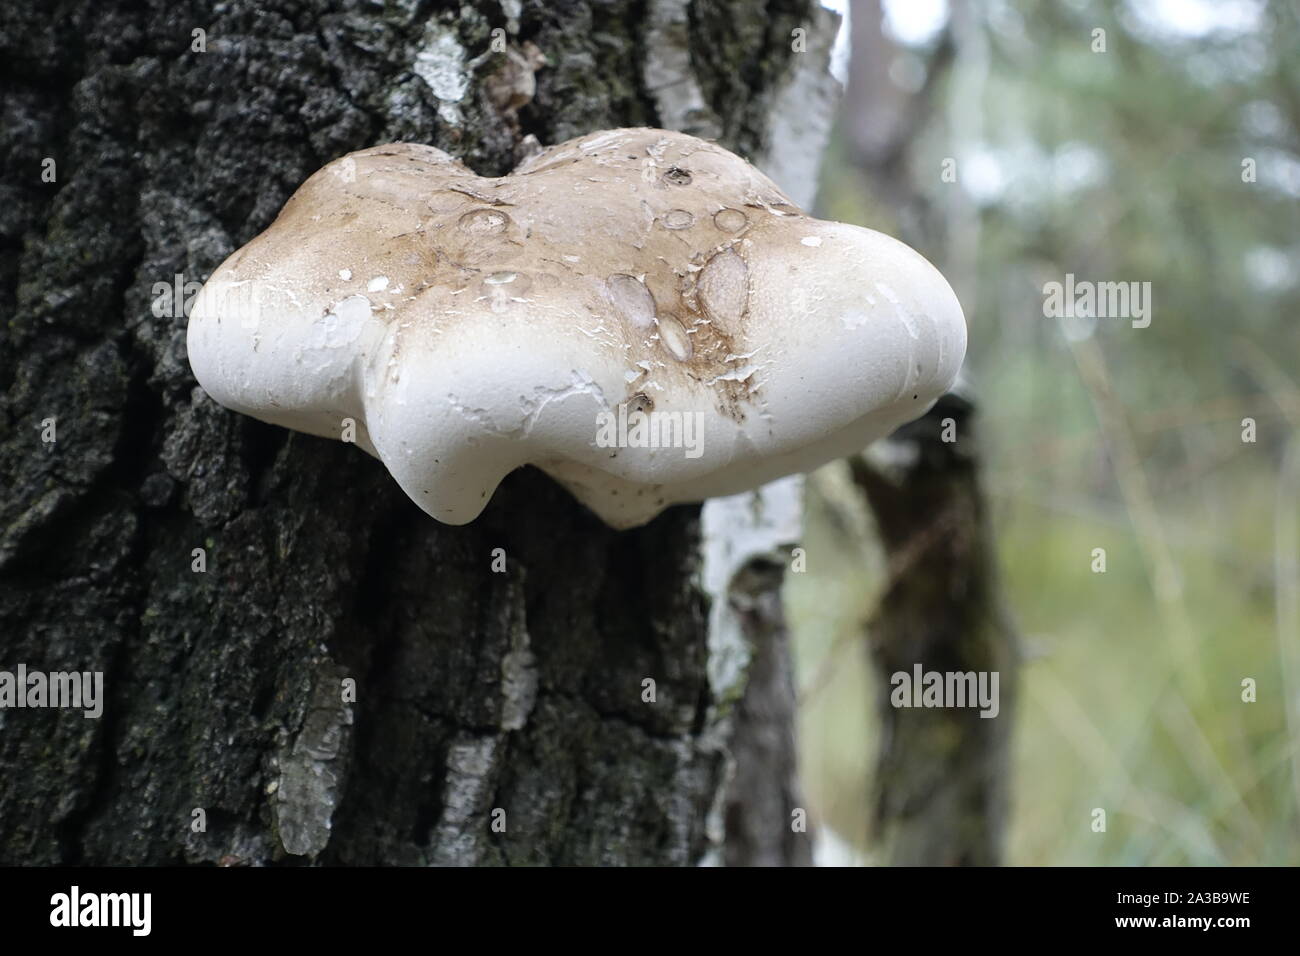 Mushrooms in a forest Stock Photo